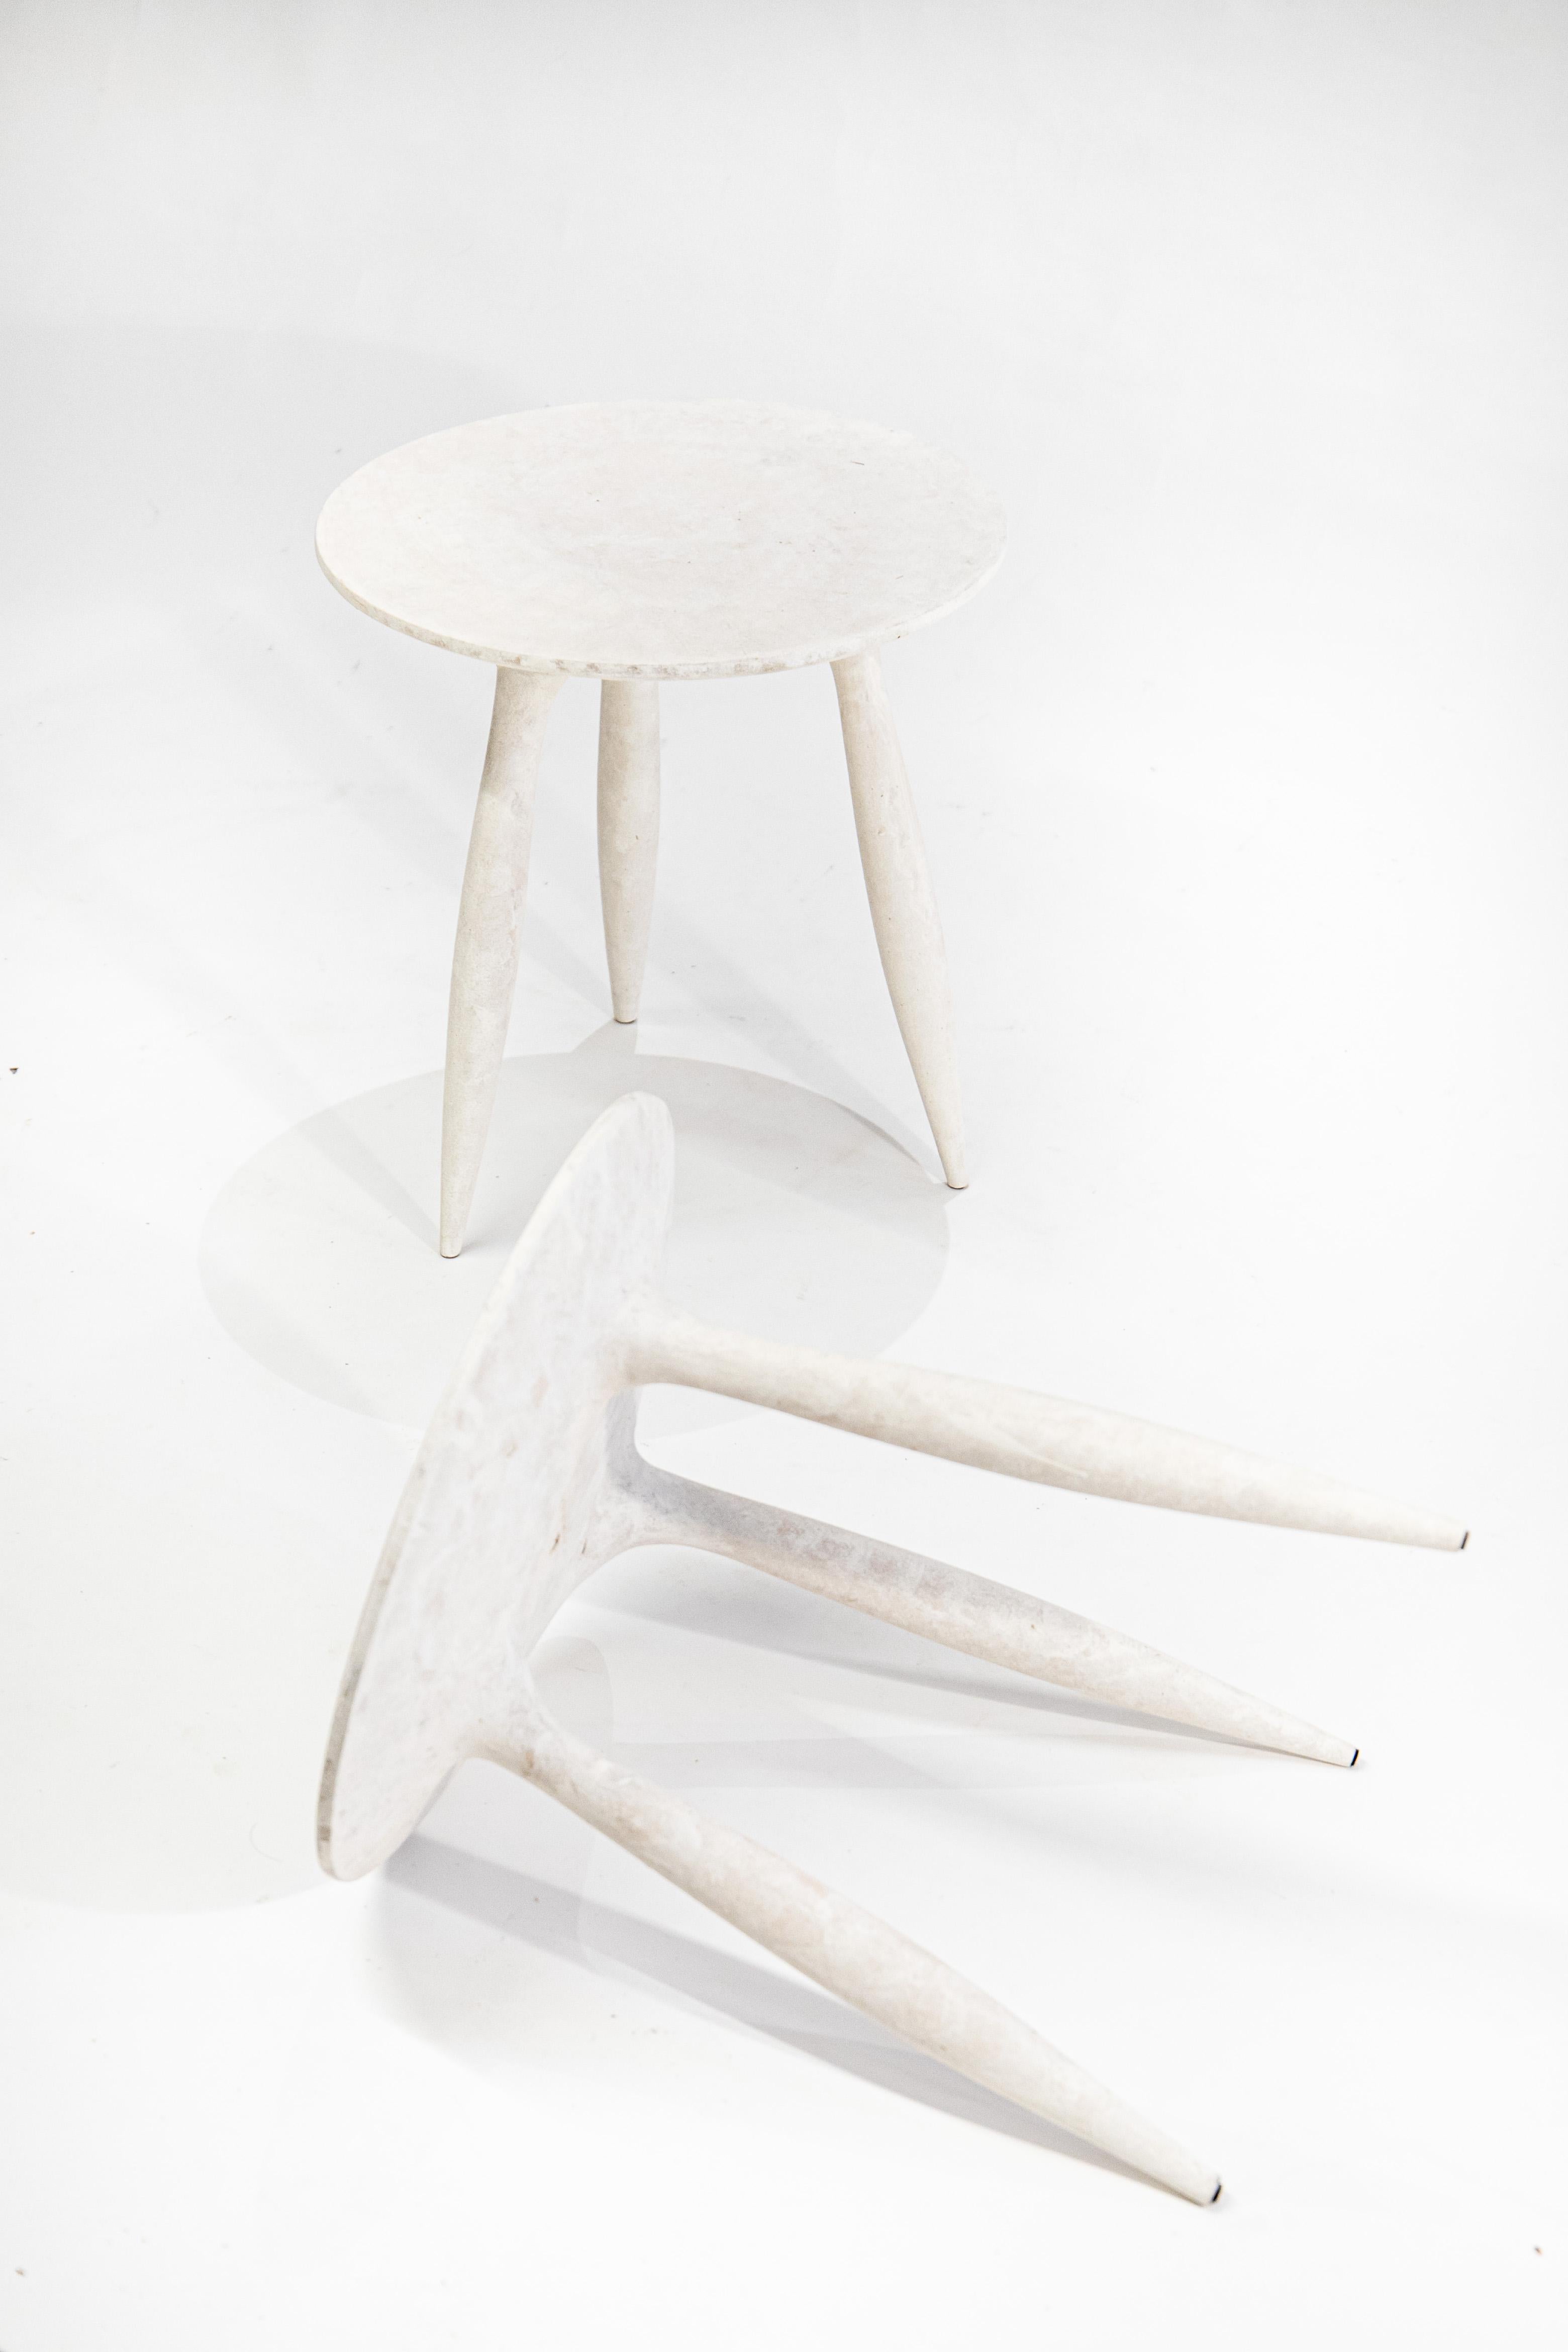 Set of 2 sycamore BTRFL aside stool by Cedric Breisacher
Dimensions: D 38 x H 40 cm
Materials: Sycamore wood, moon white finish

Stool or occasional table, the BTRFL is a piece in the line minimal. In a way, it takes up the assemblies of the